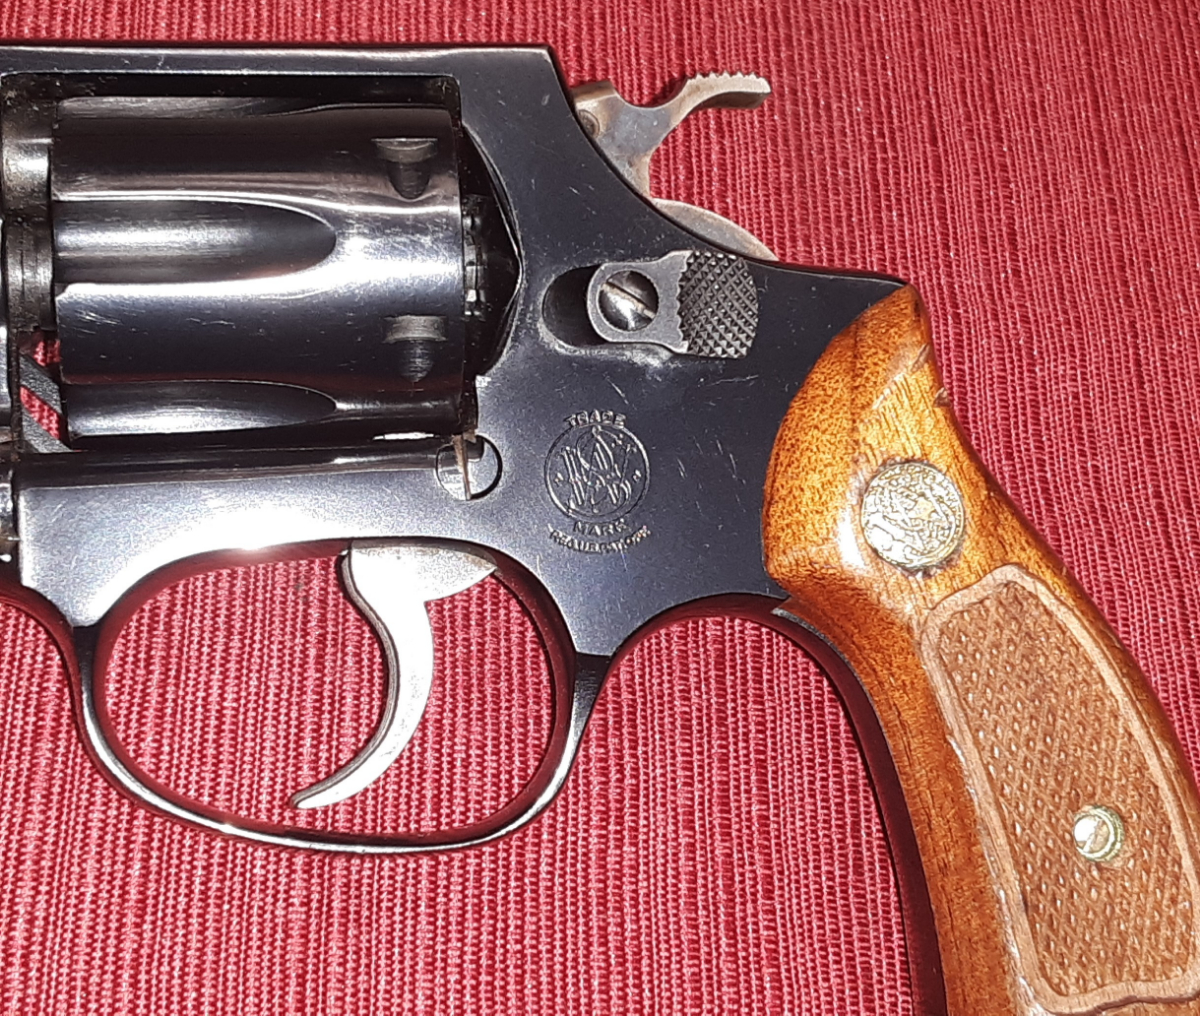 Smith & Wesson Model 30-1 6-Shot Round Butt J-Frame Revolver - 1970 .32 S&W Long - Picture 4